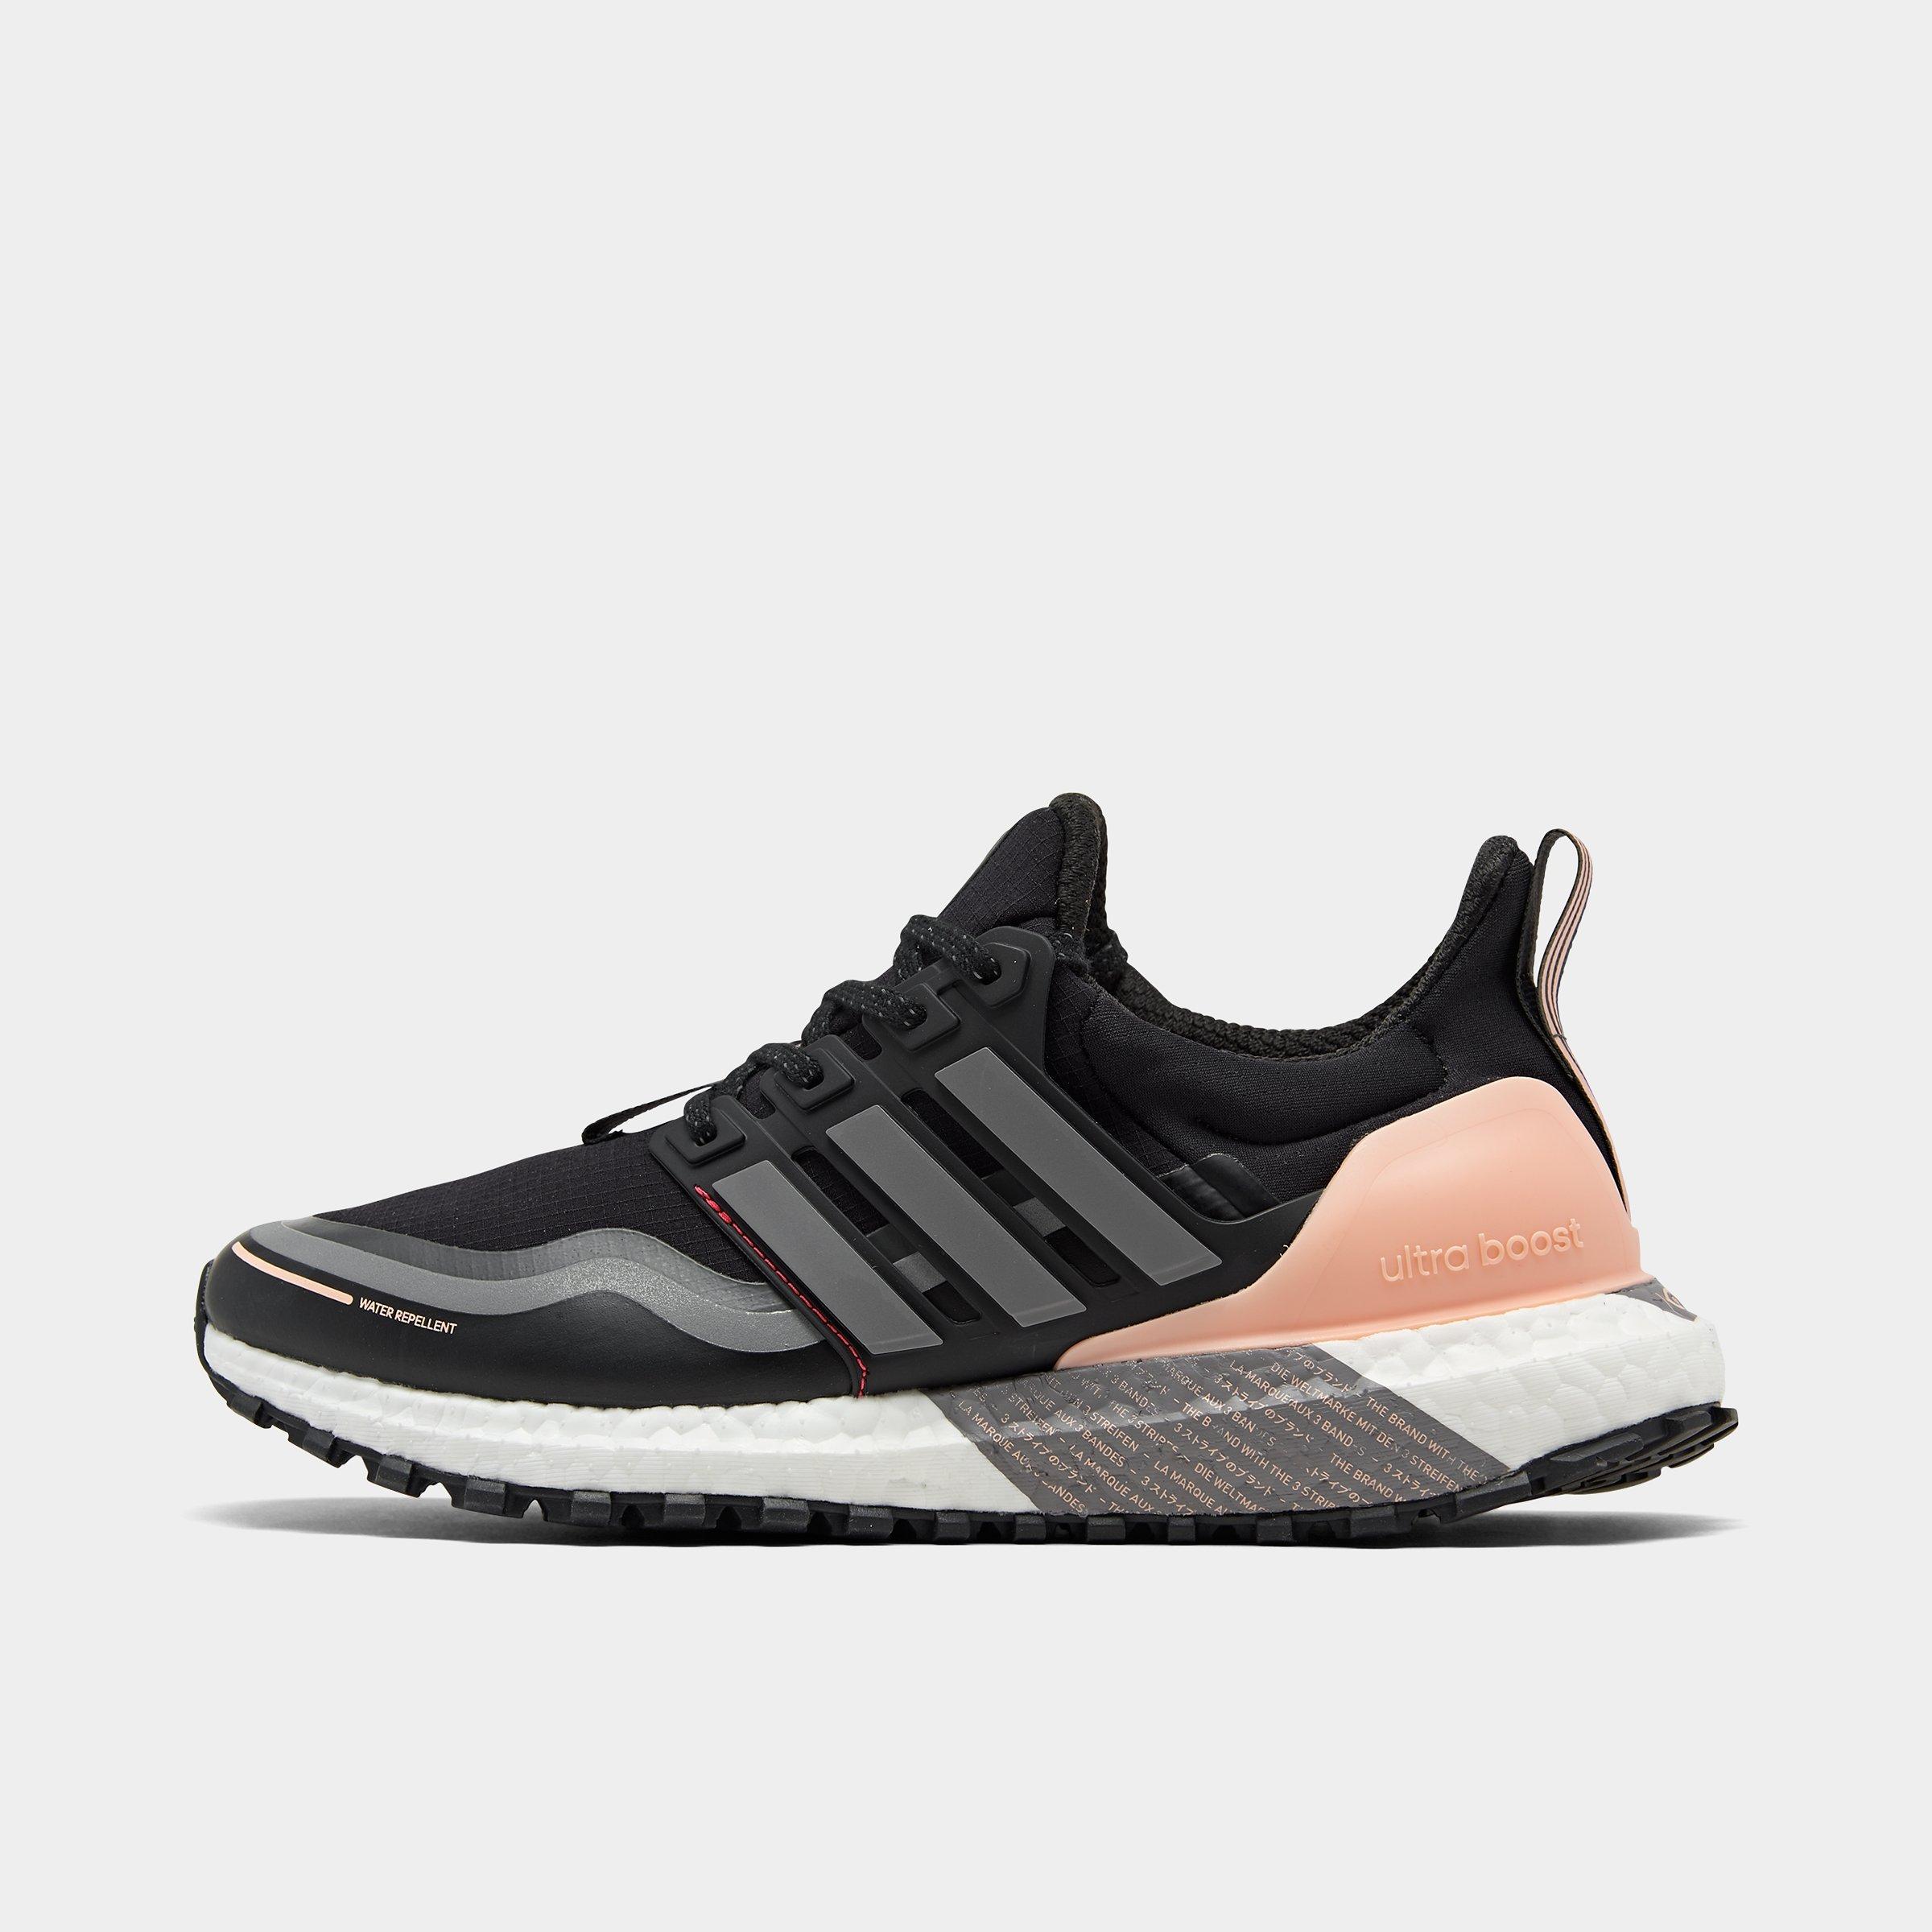 adidas ultra boost grey and pink